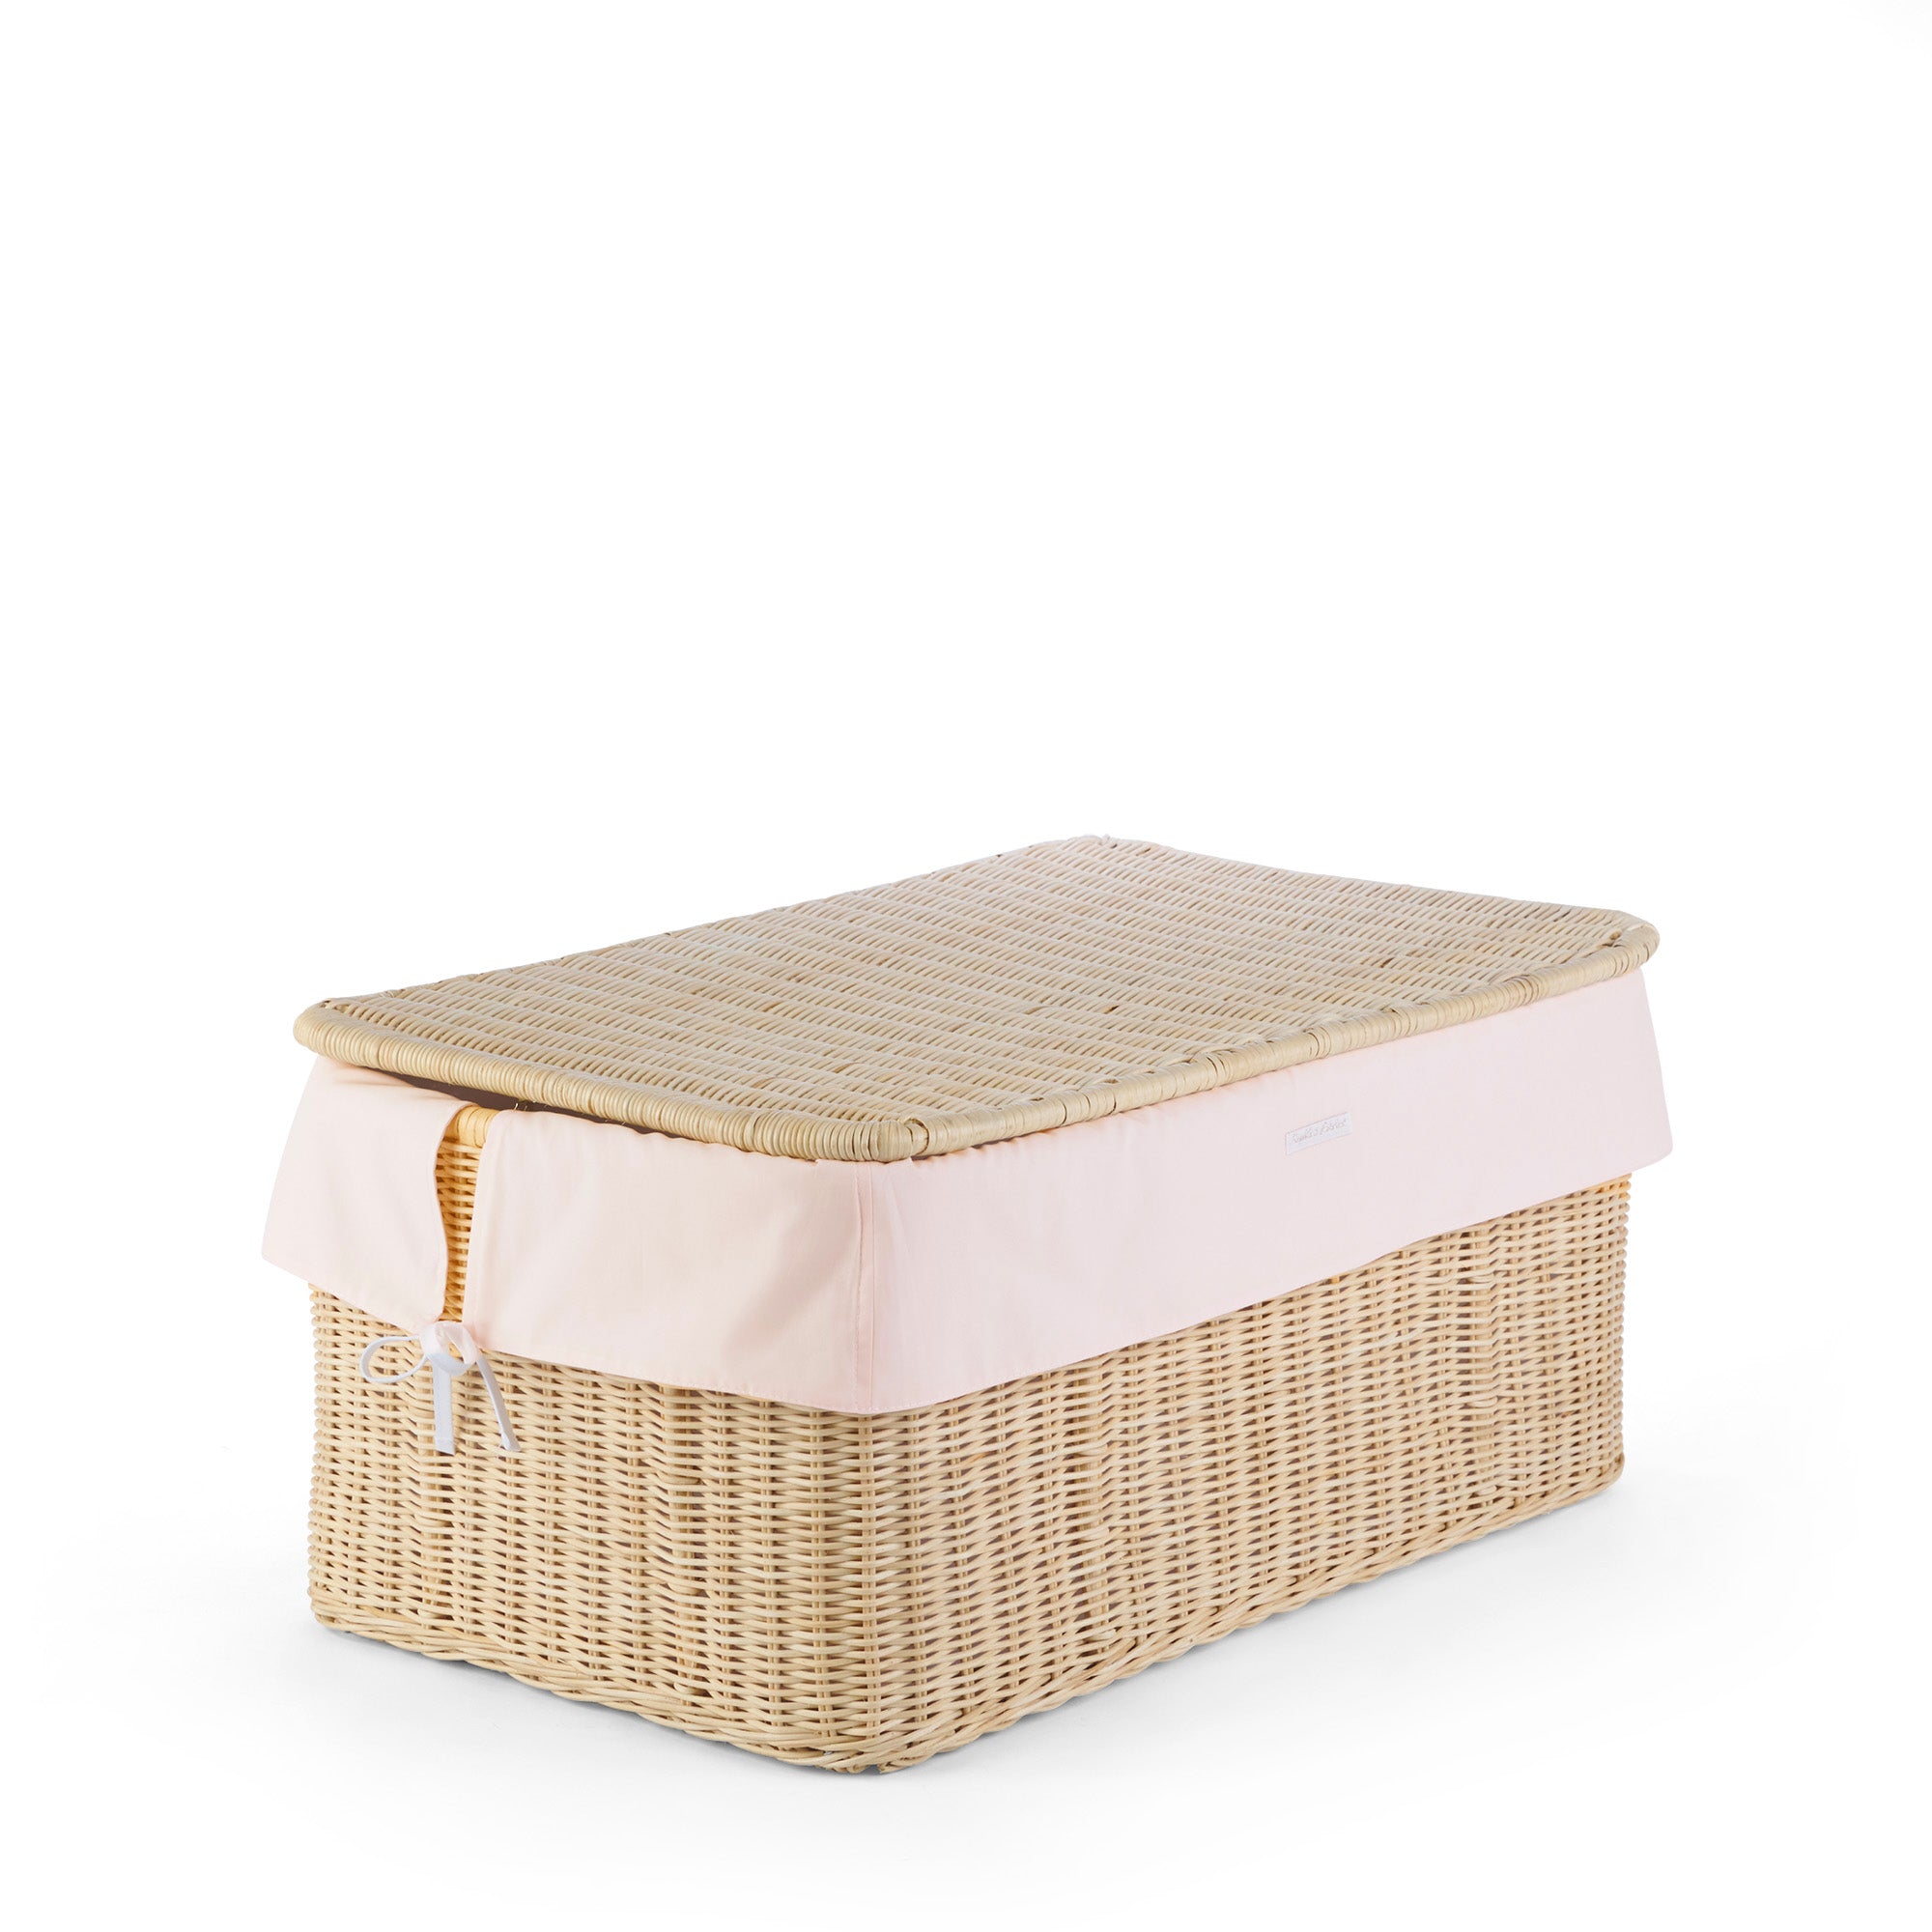 Theophile & Patachou Big Natural Wicker Toy Box and Cover - Cotton Pink